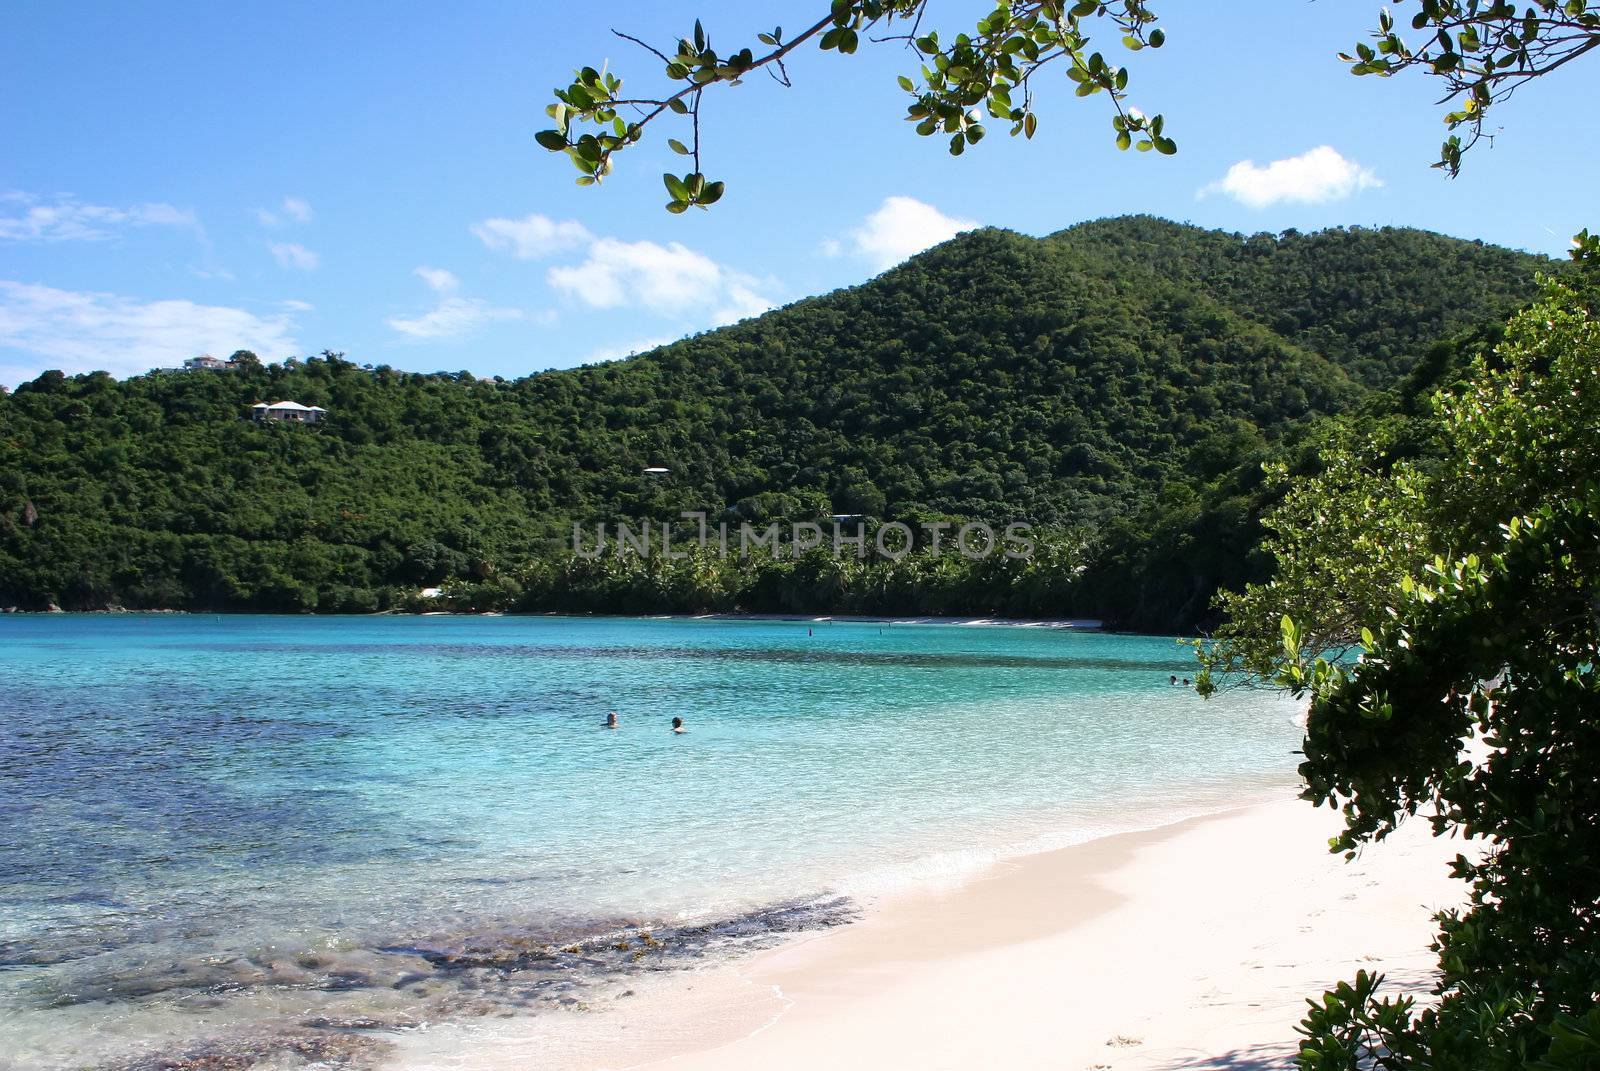 Sandy beach and bay on the island of St John in the Caribbean